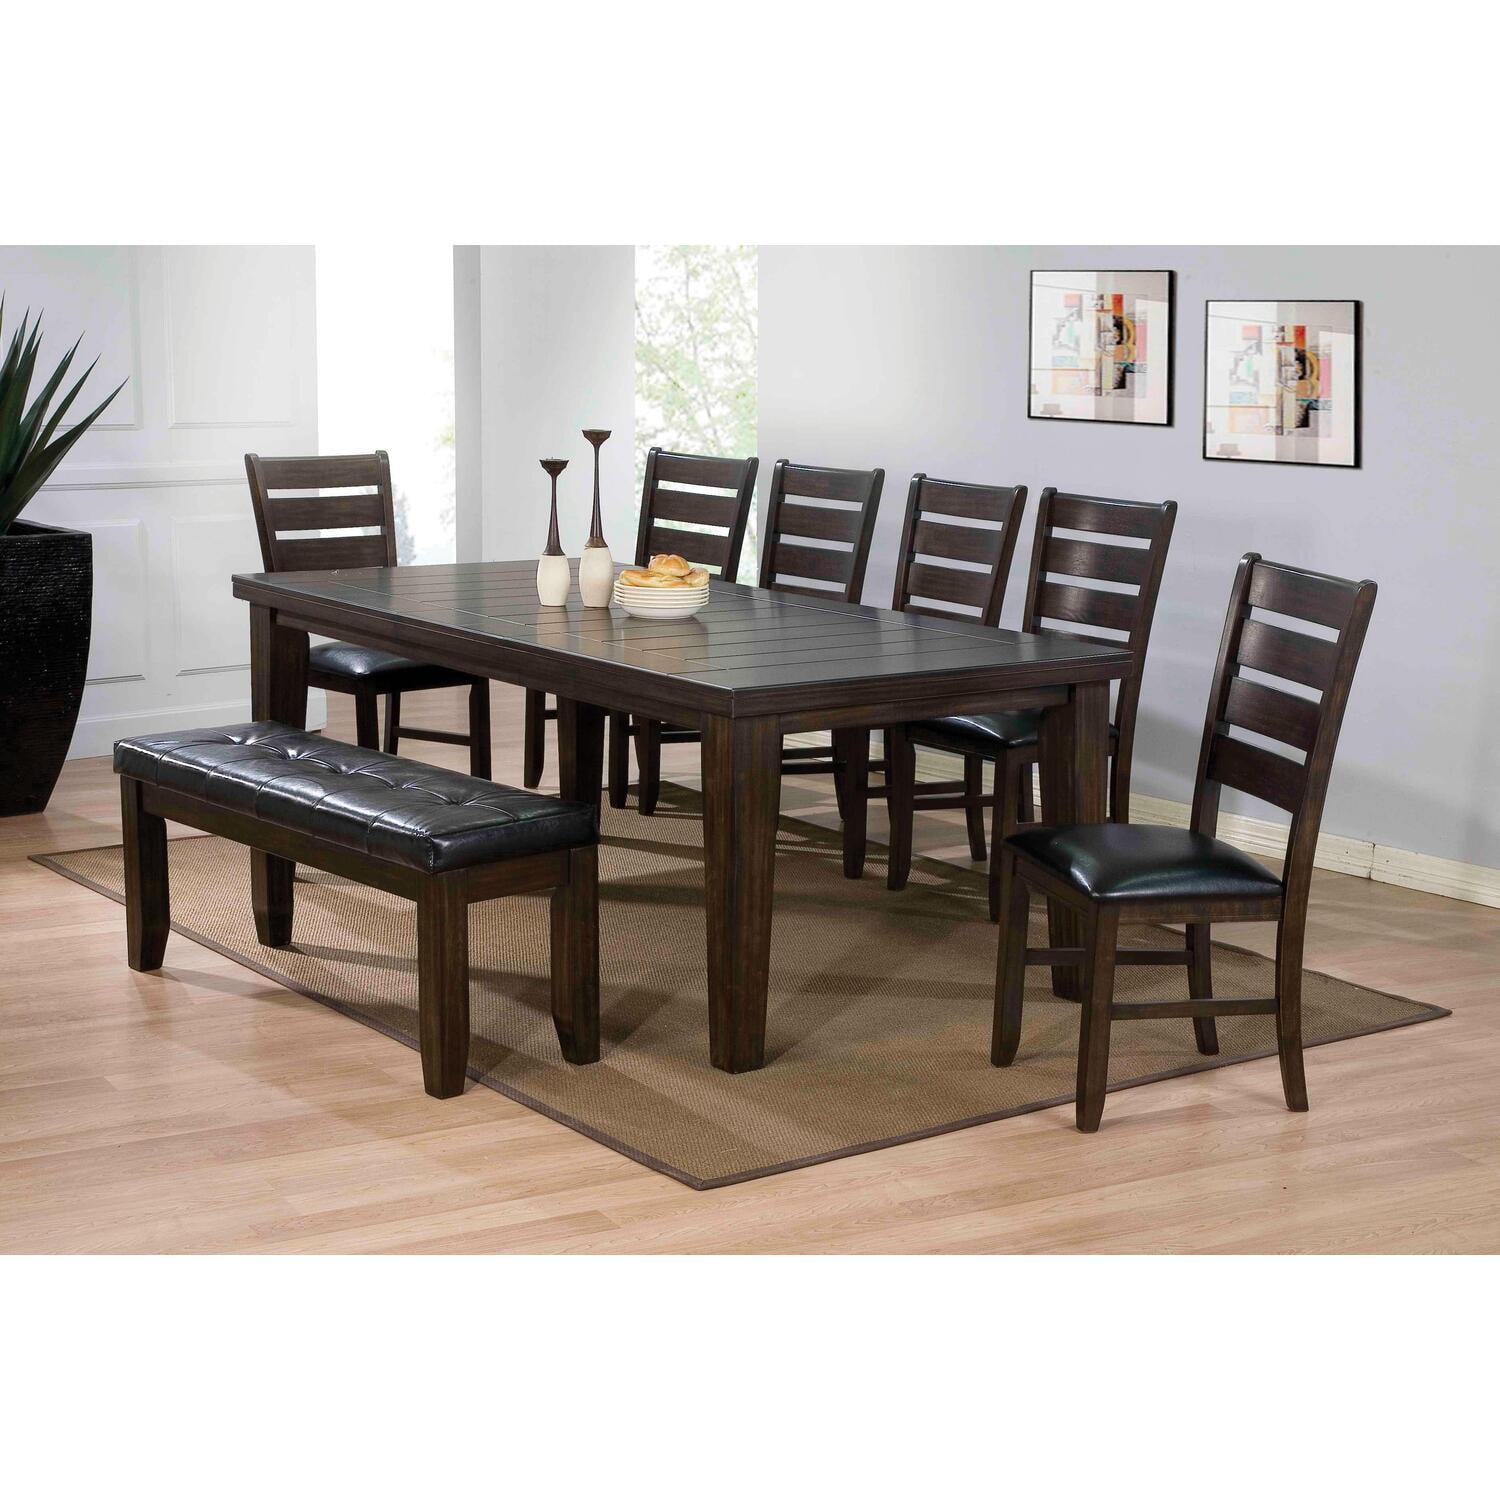 Espresso Extendable Rectangular Wood Dining Table with Leaf